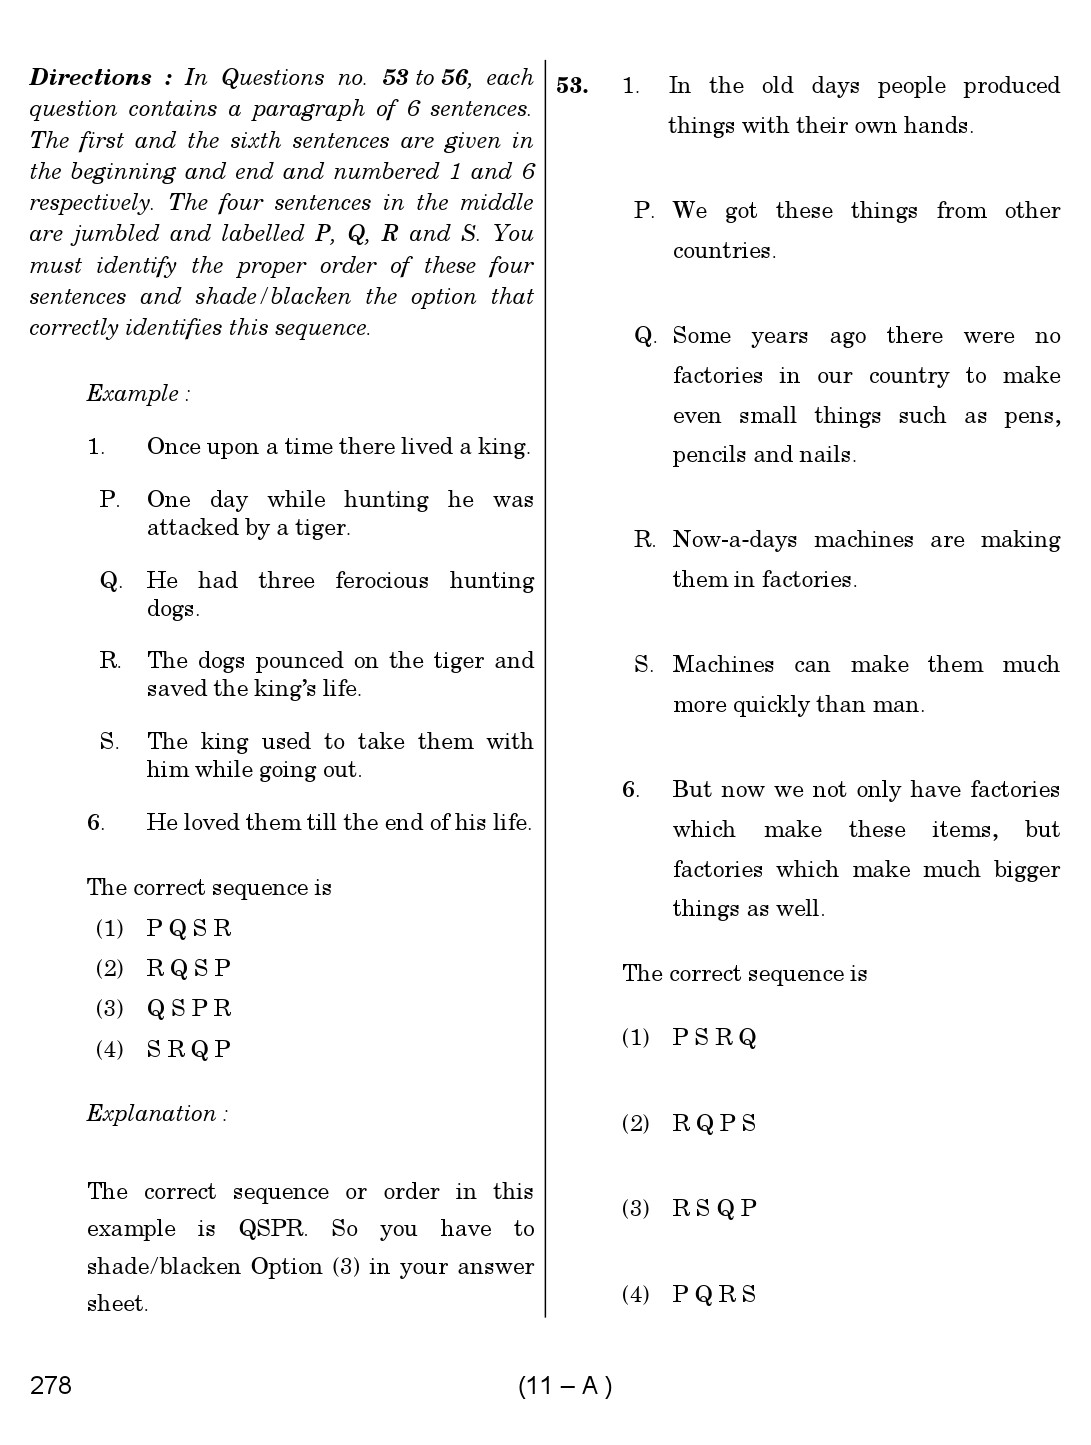 Karnataka PSC First Division Computer Assistants Exam Sample Question Paper 278 11